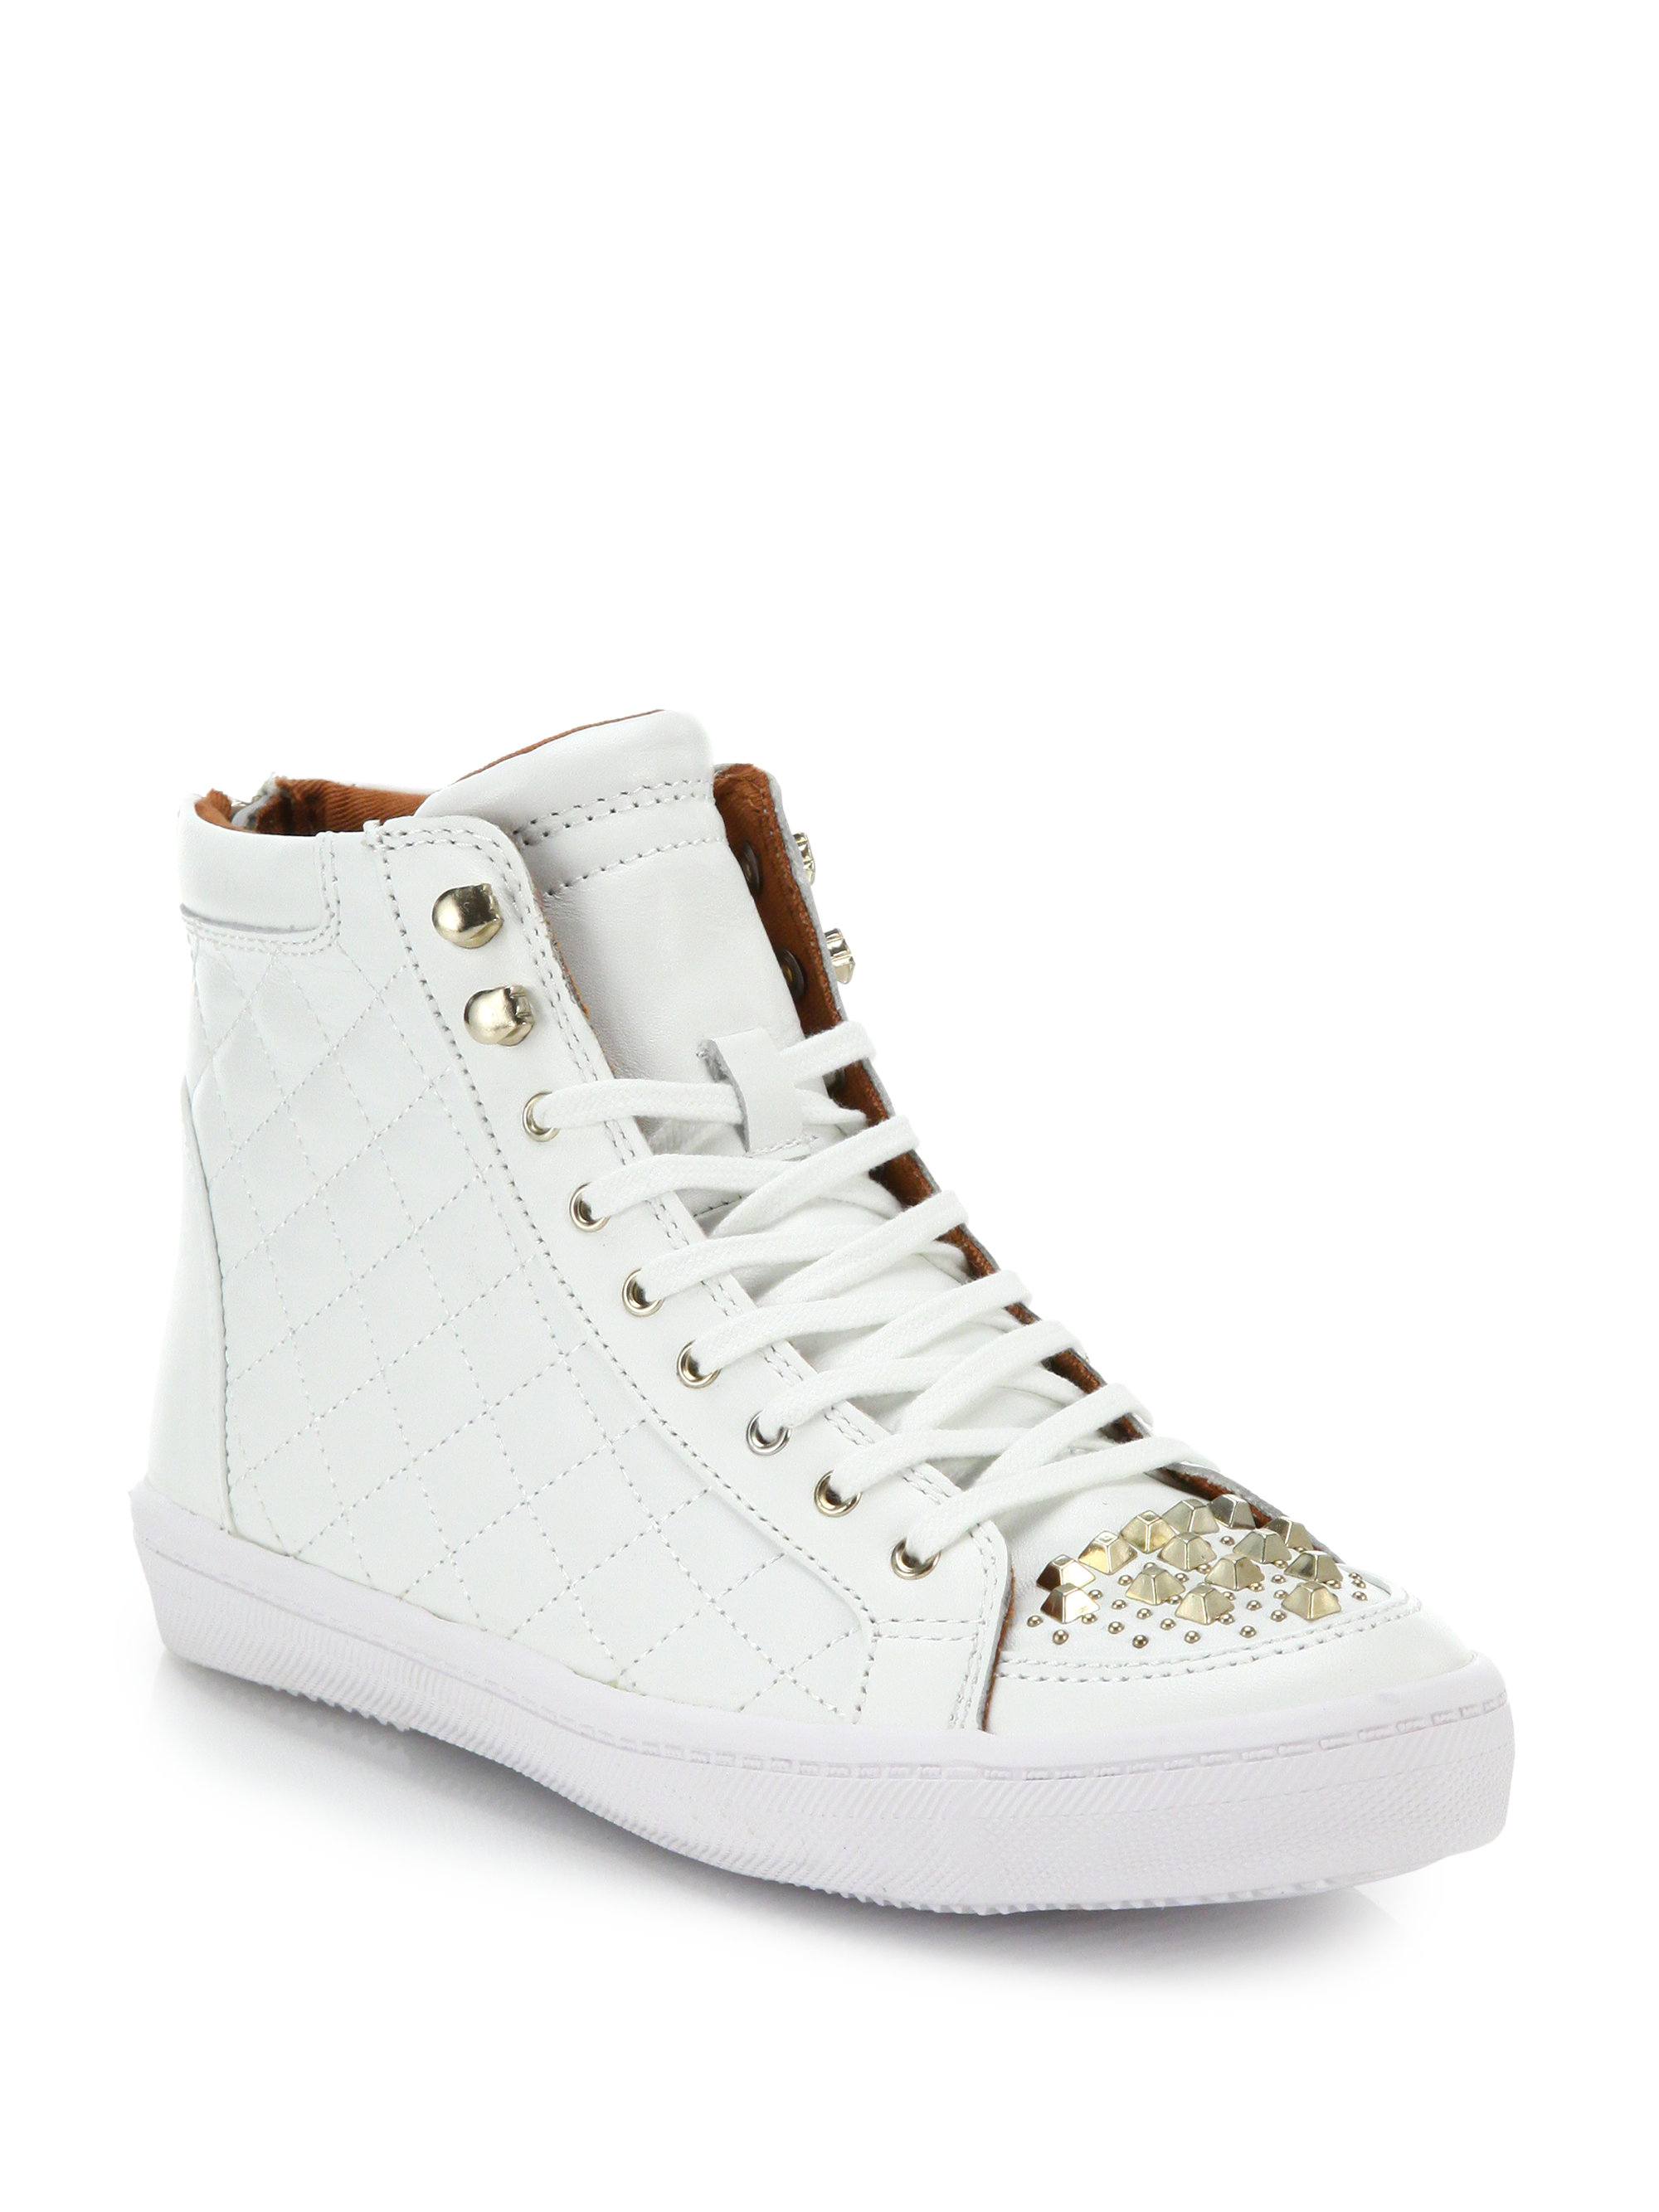 Lyst - Rebecca Minkoff Sandi Perforated Leather High-top Sneakers in White